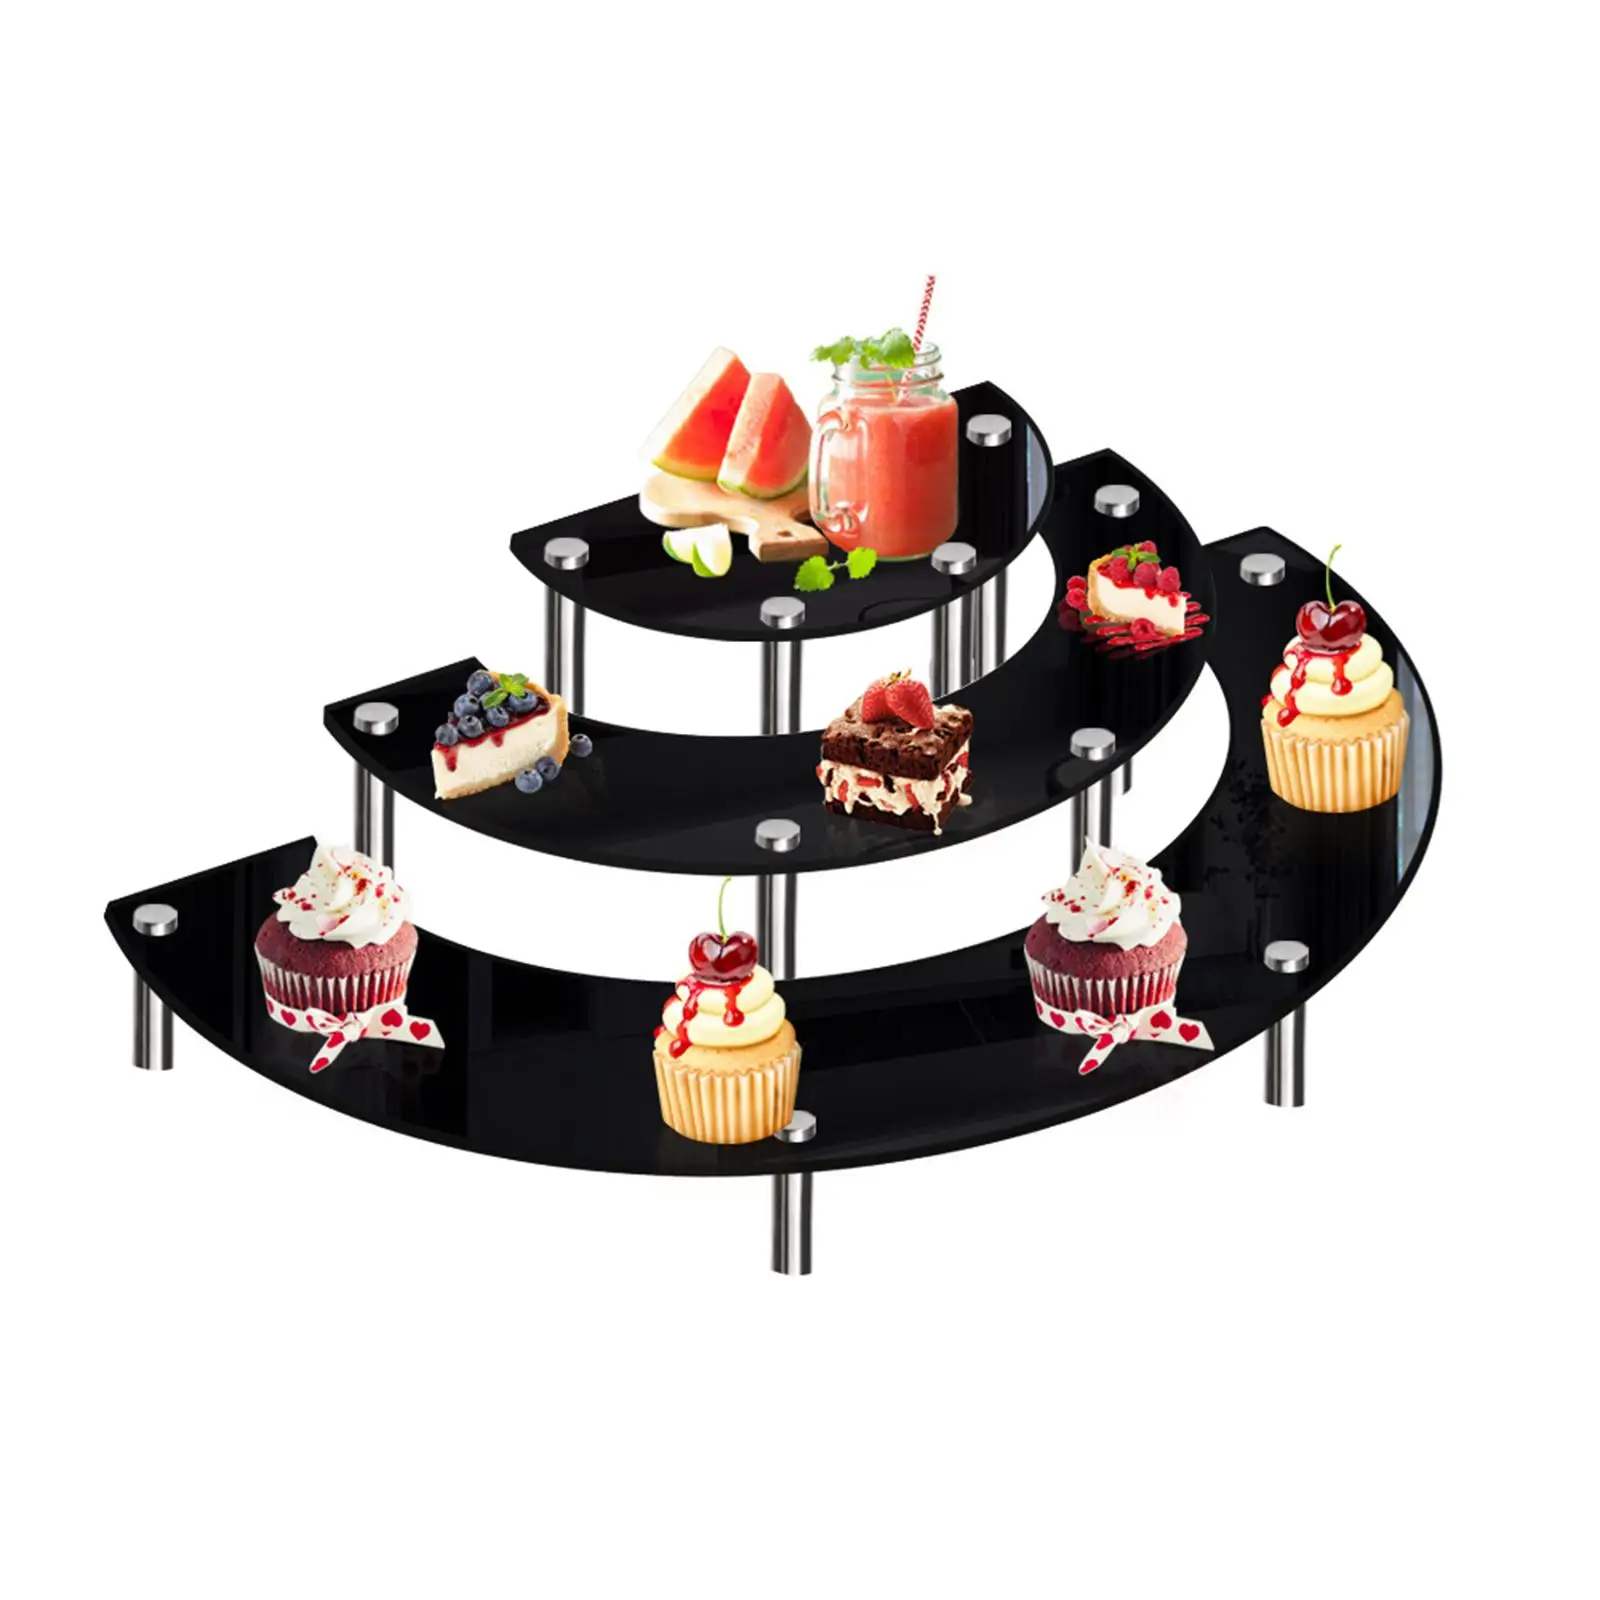 3 Tier Acrylic Half Moon Dessert Cupcake Display Stand for Appetizers Collection Figures Pastries Wedding Home